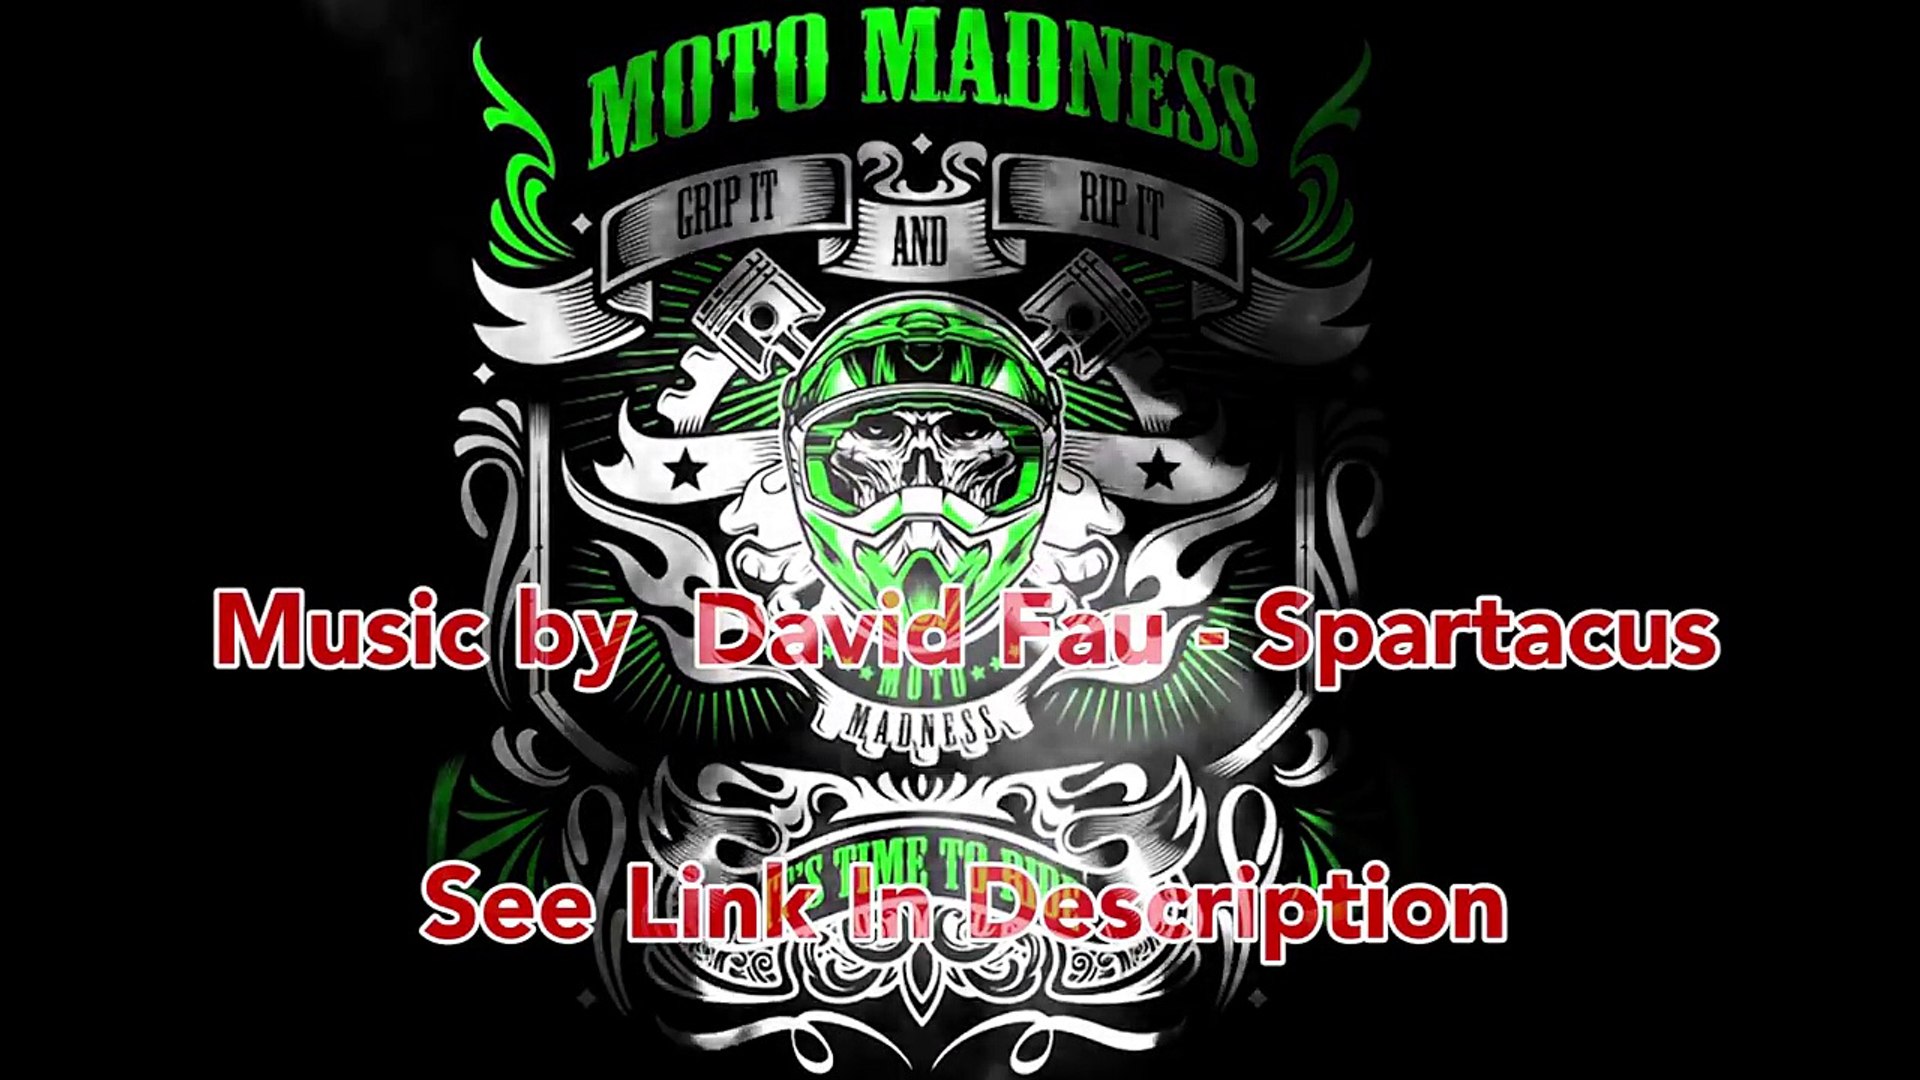 Moto Madness Music - INTRO SONG!!! Spartacus - video Dailymotion